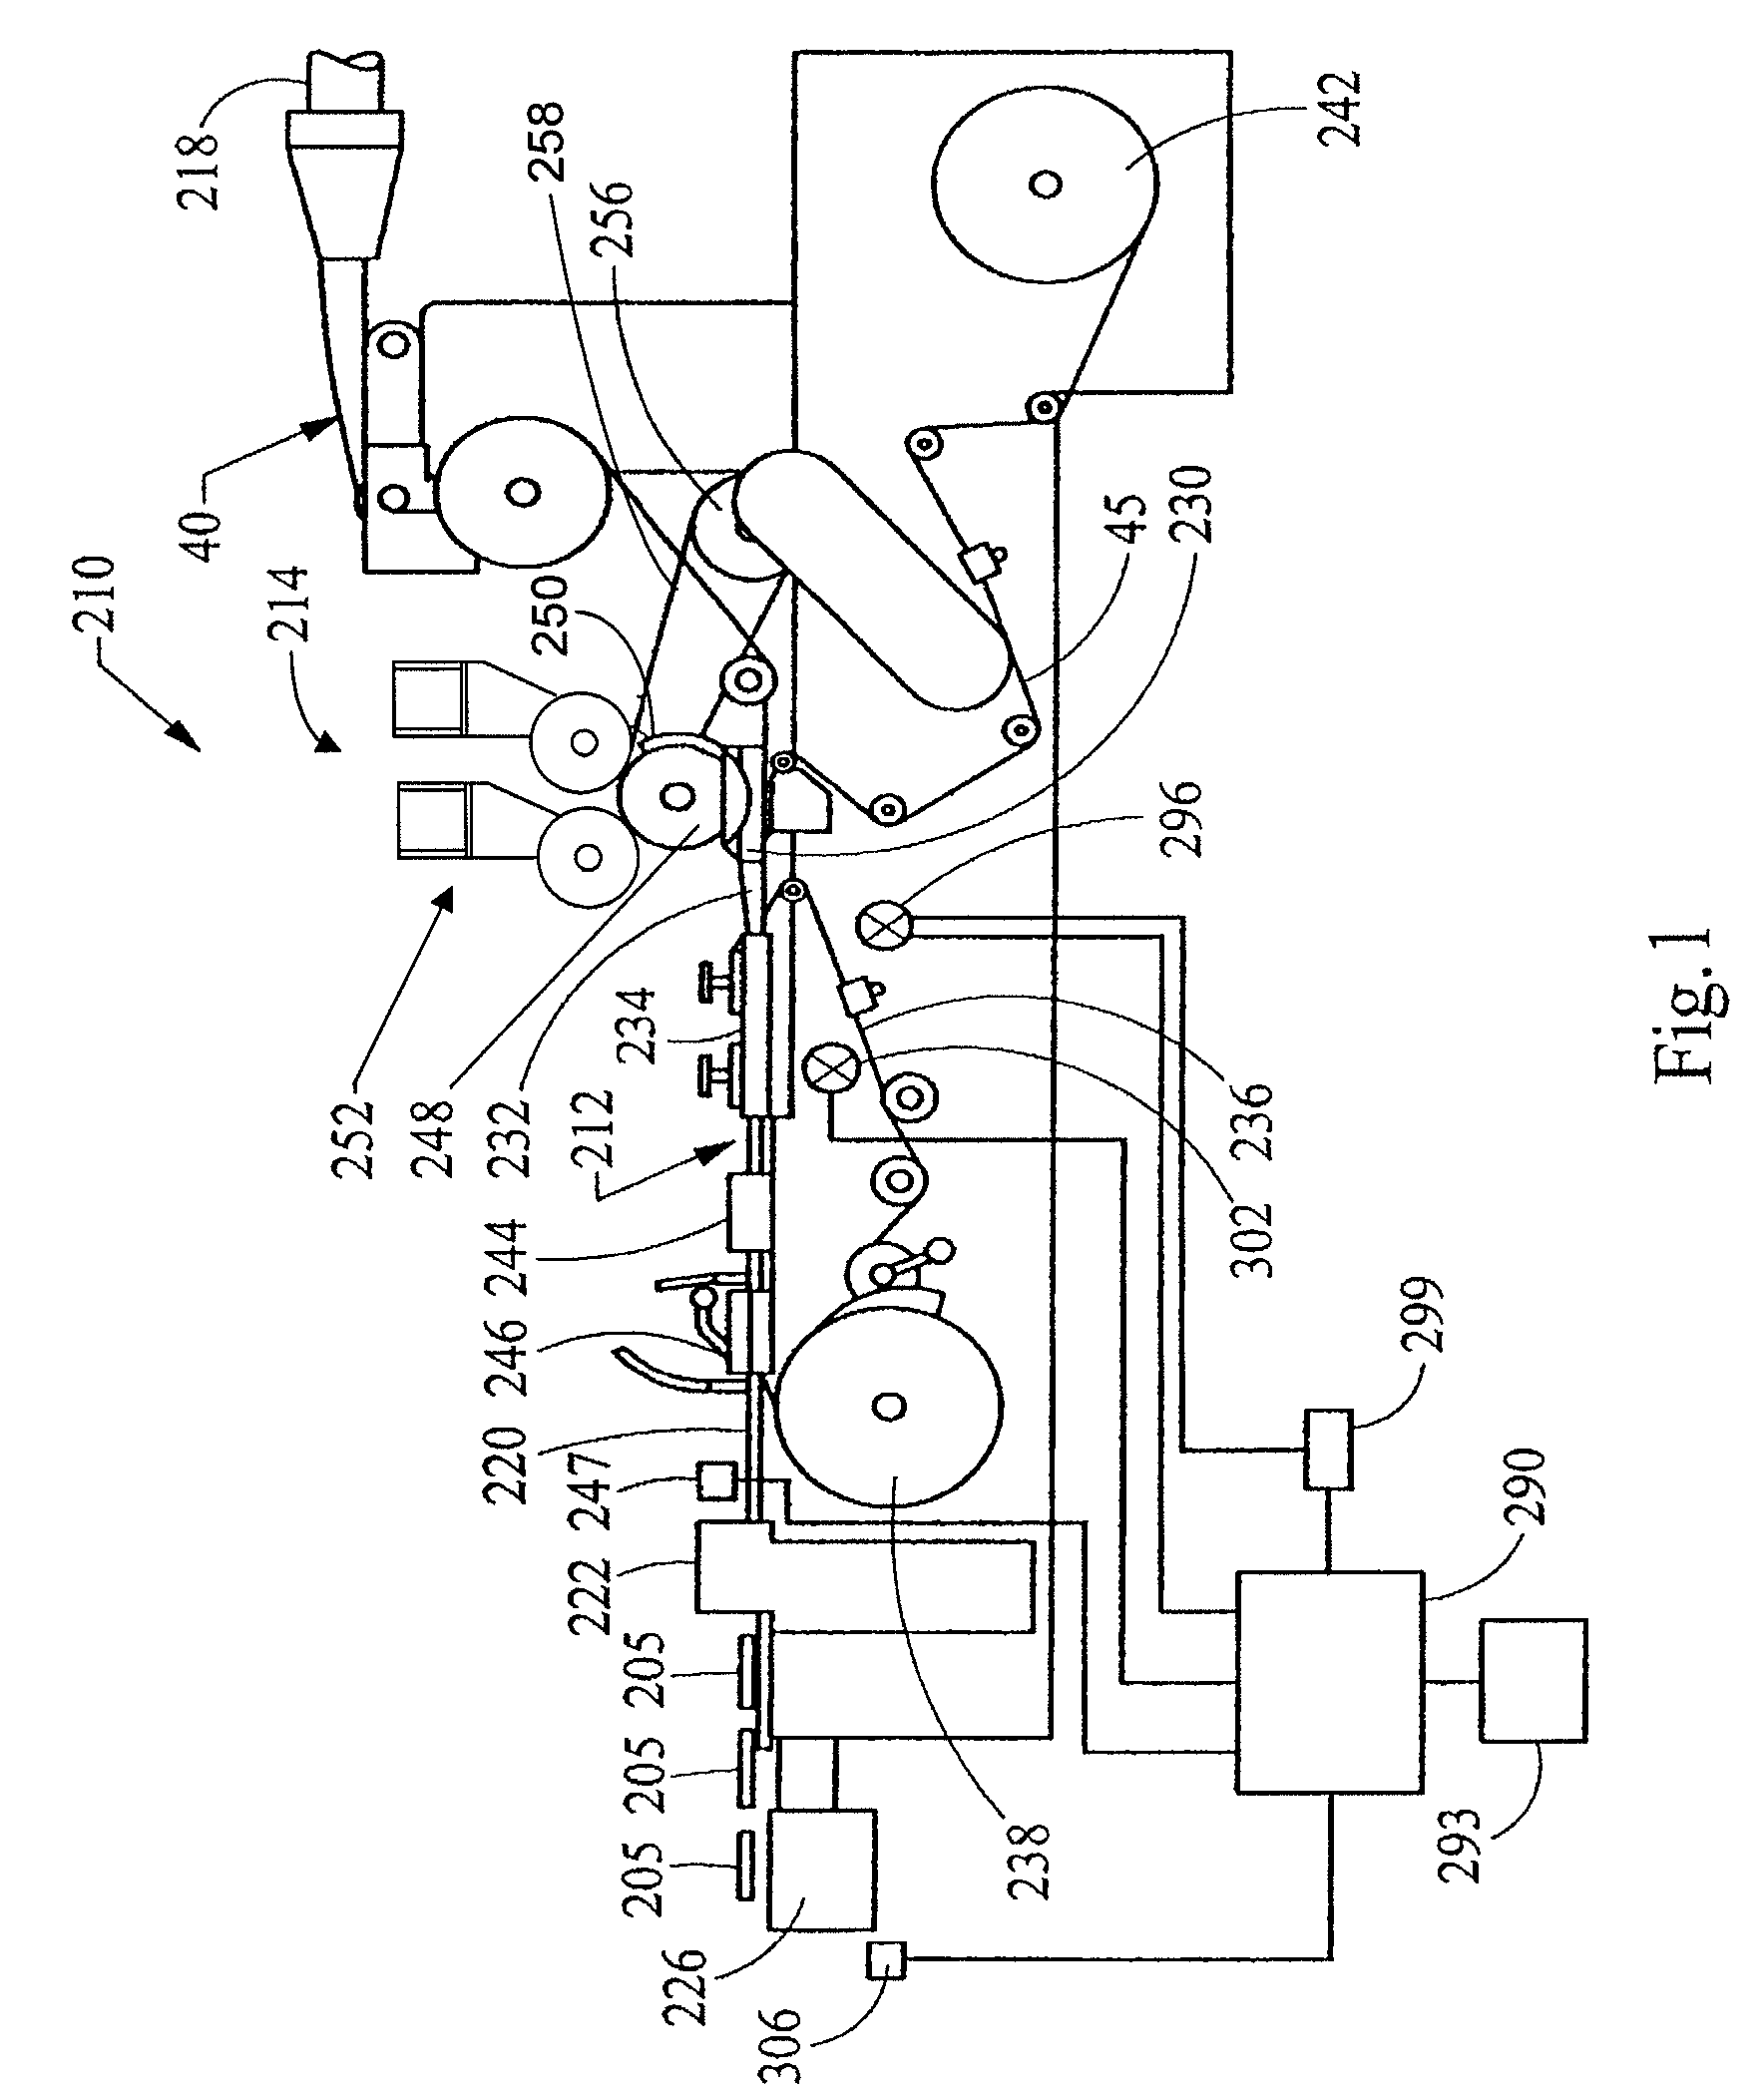 Apparatus for inserting objects into a filter component of a smoking article